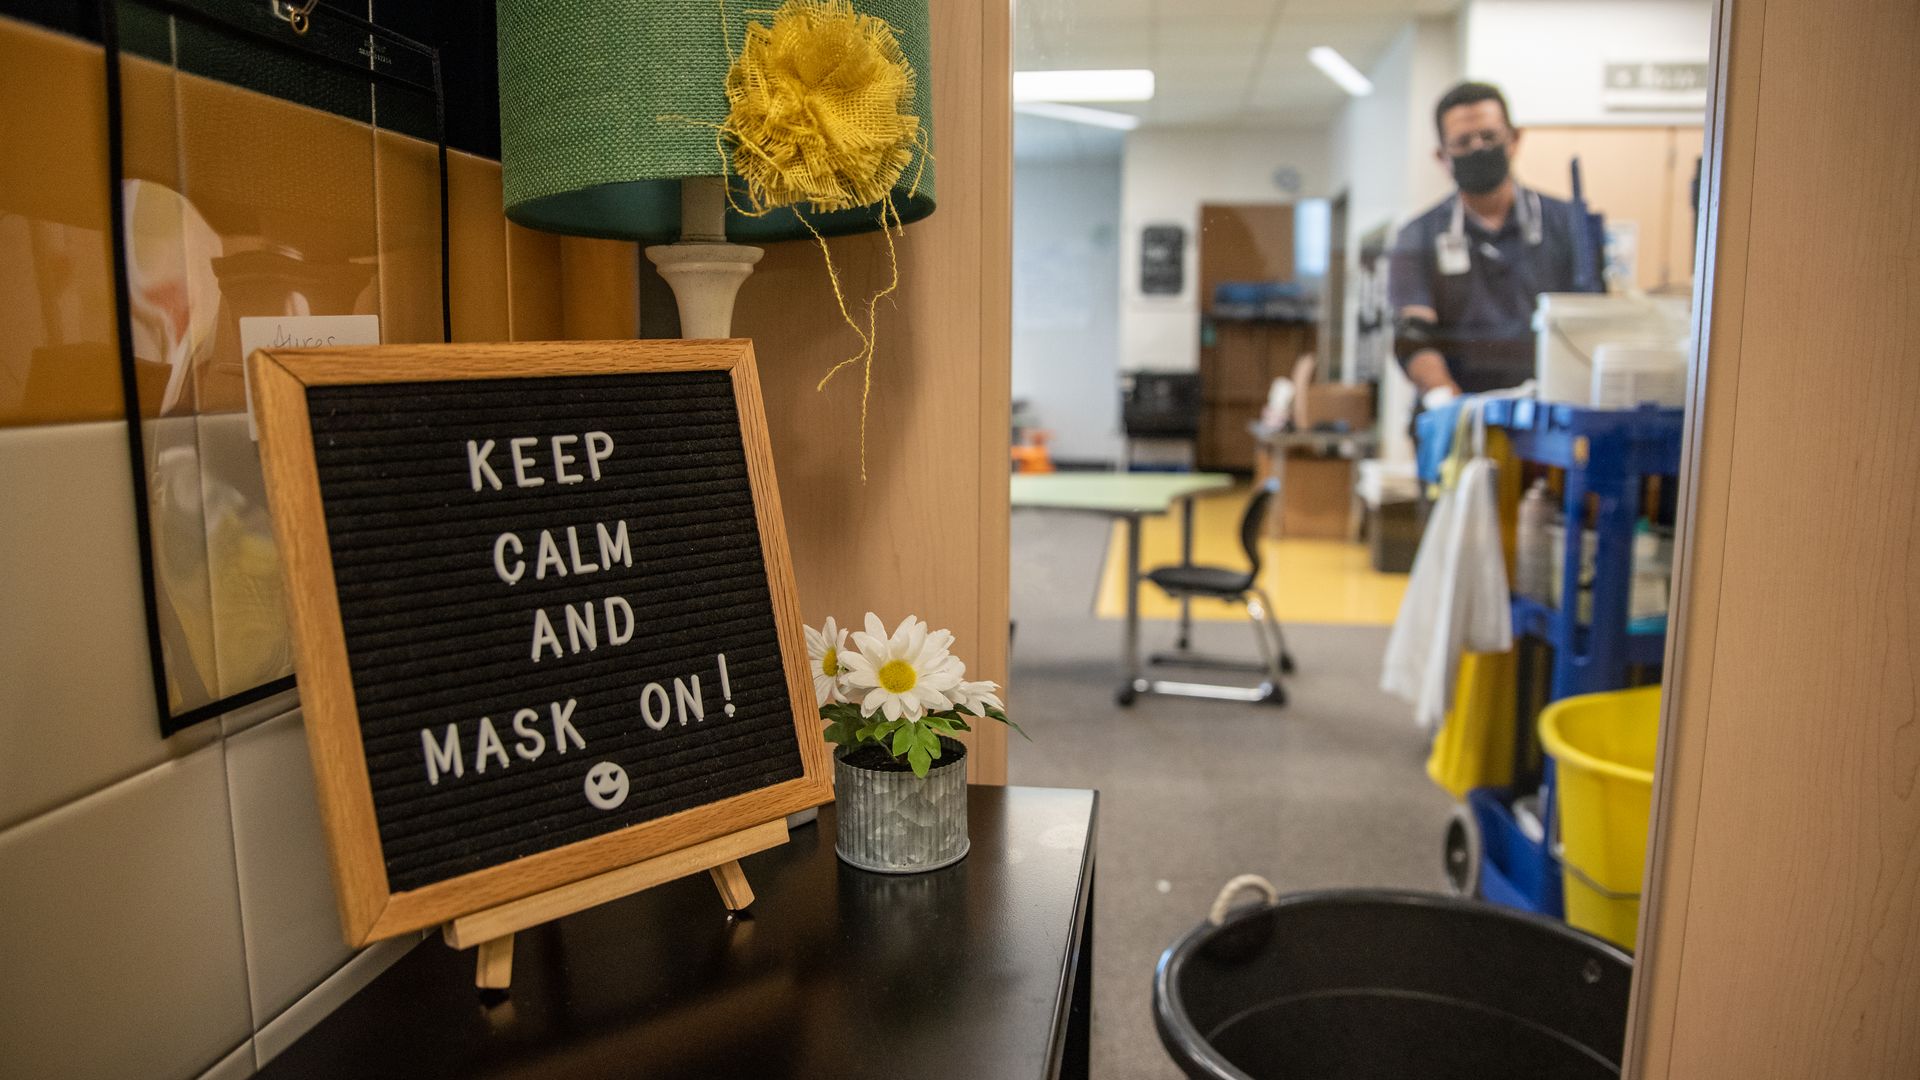 A sign outside a classroom reminds students to wear masks at an elementary school in Leander, Texas, U.S., on Friday, Sept. 18, 2020.